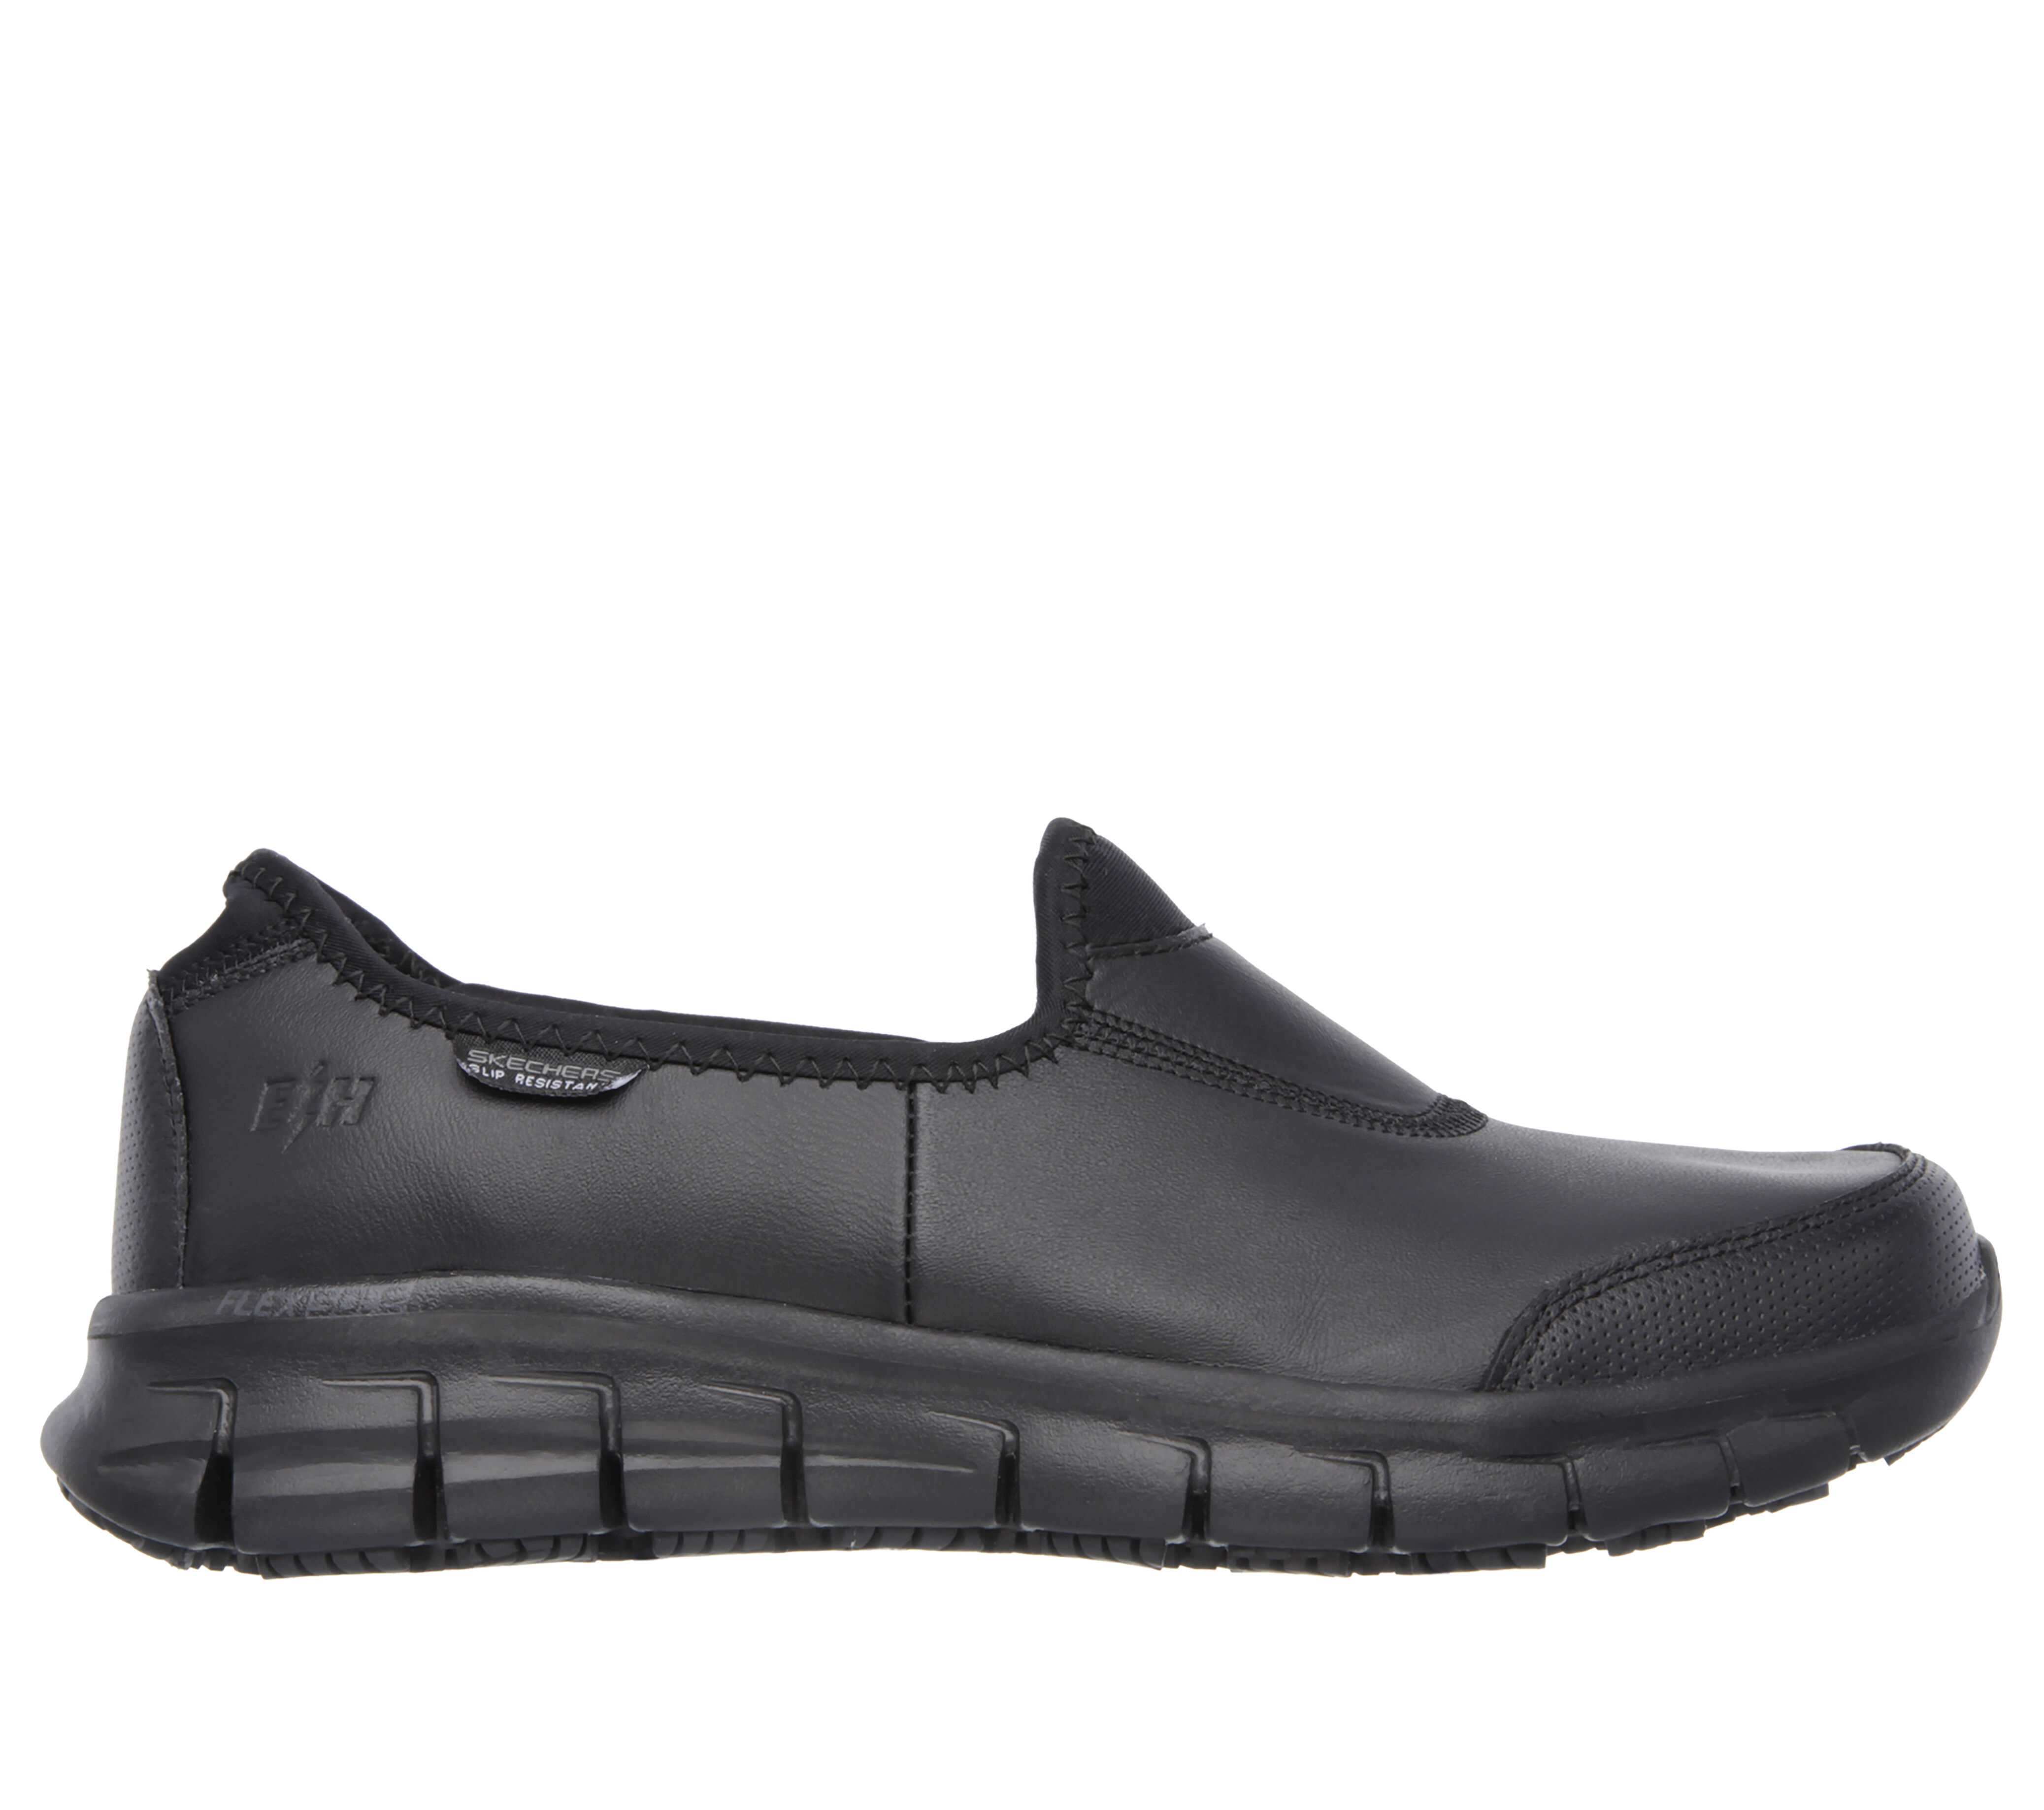 Relaxed Fit - Sure Track | SKECHERS UK